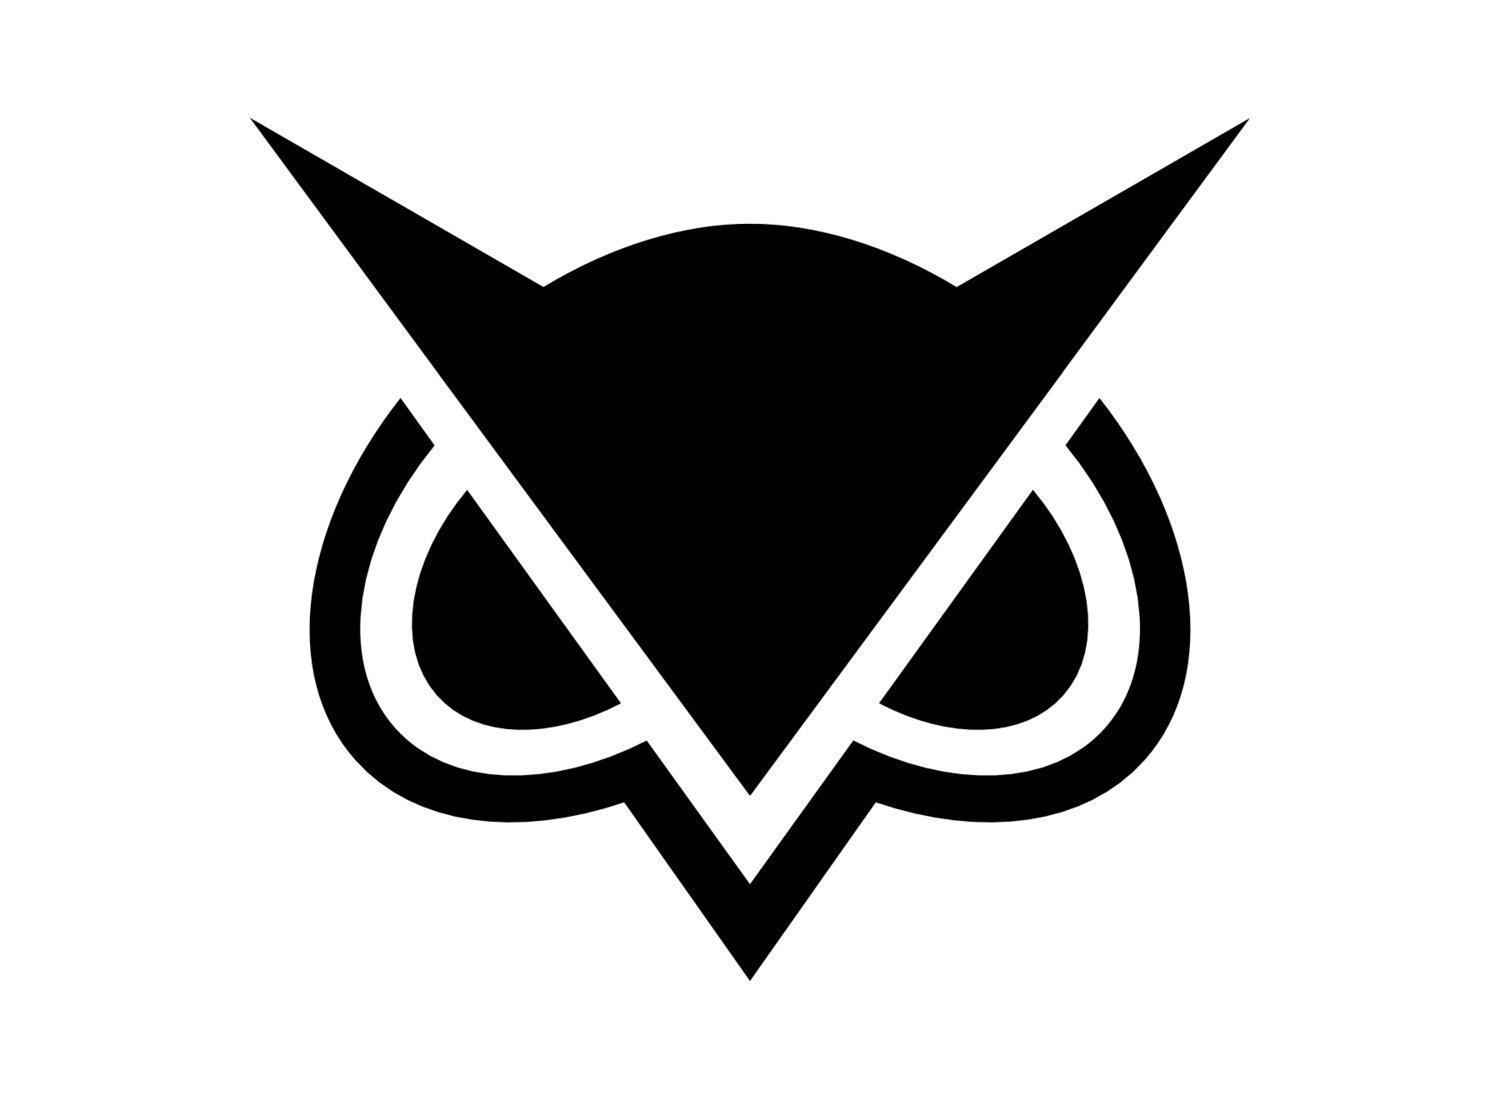 Vanoss Logo - VanossGaming Logo, VanossGaming Symbol, Meaning, History and Evolution